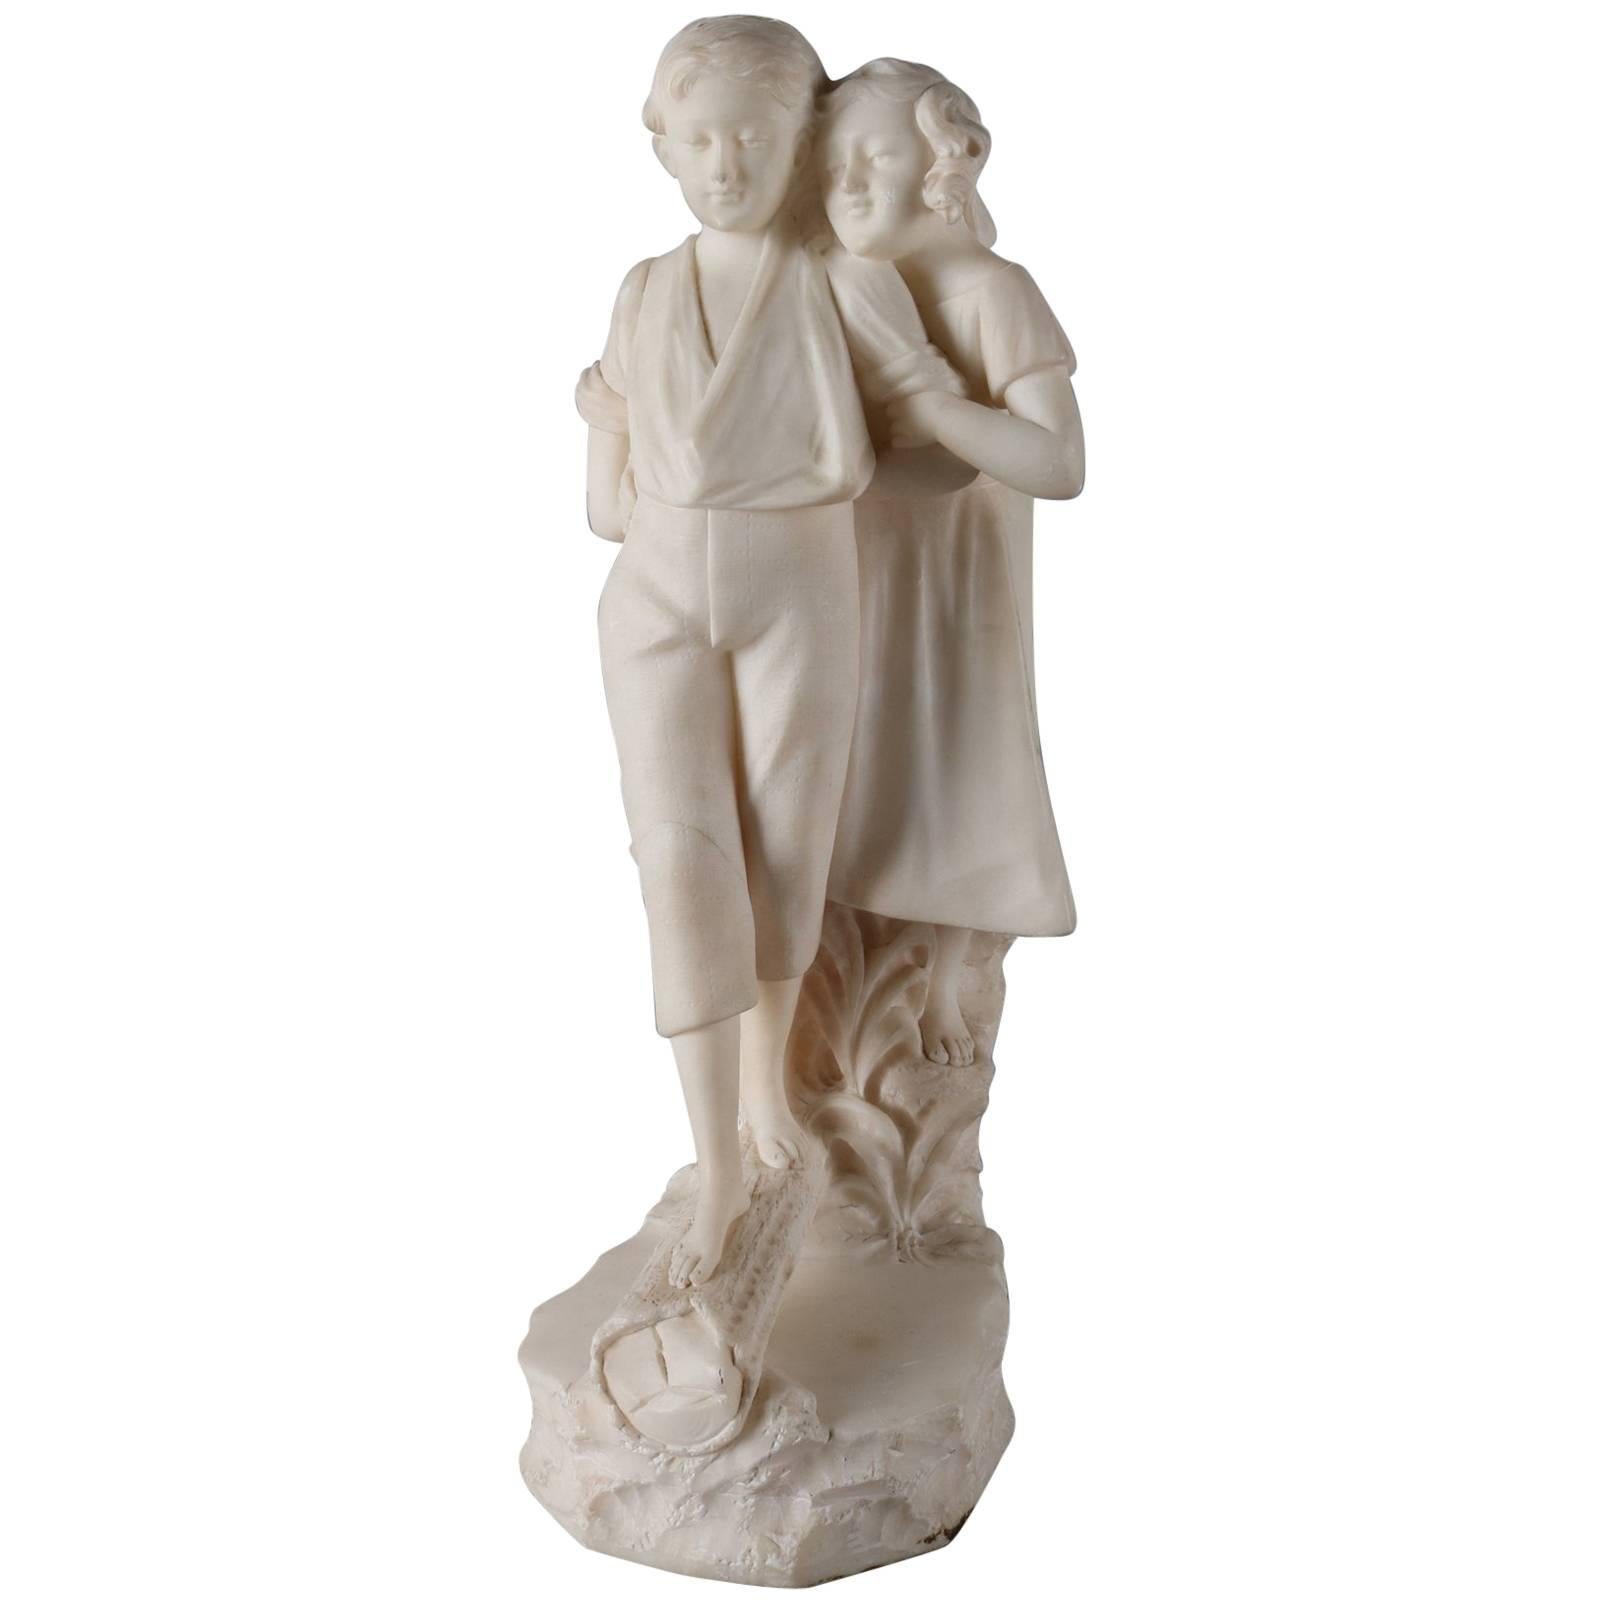 Antique Figural Carved Alabaster Sculpture of Courting Couple, 20th Century